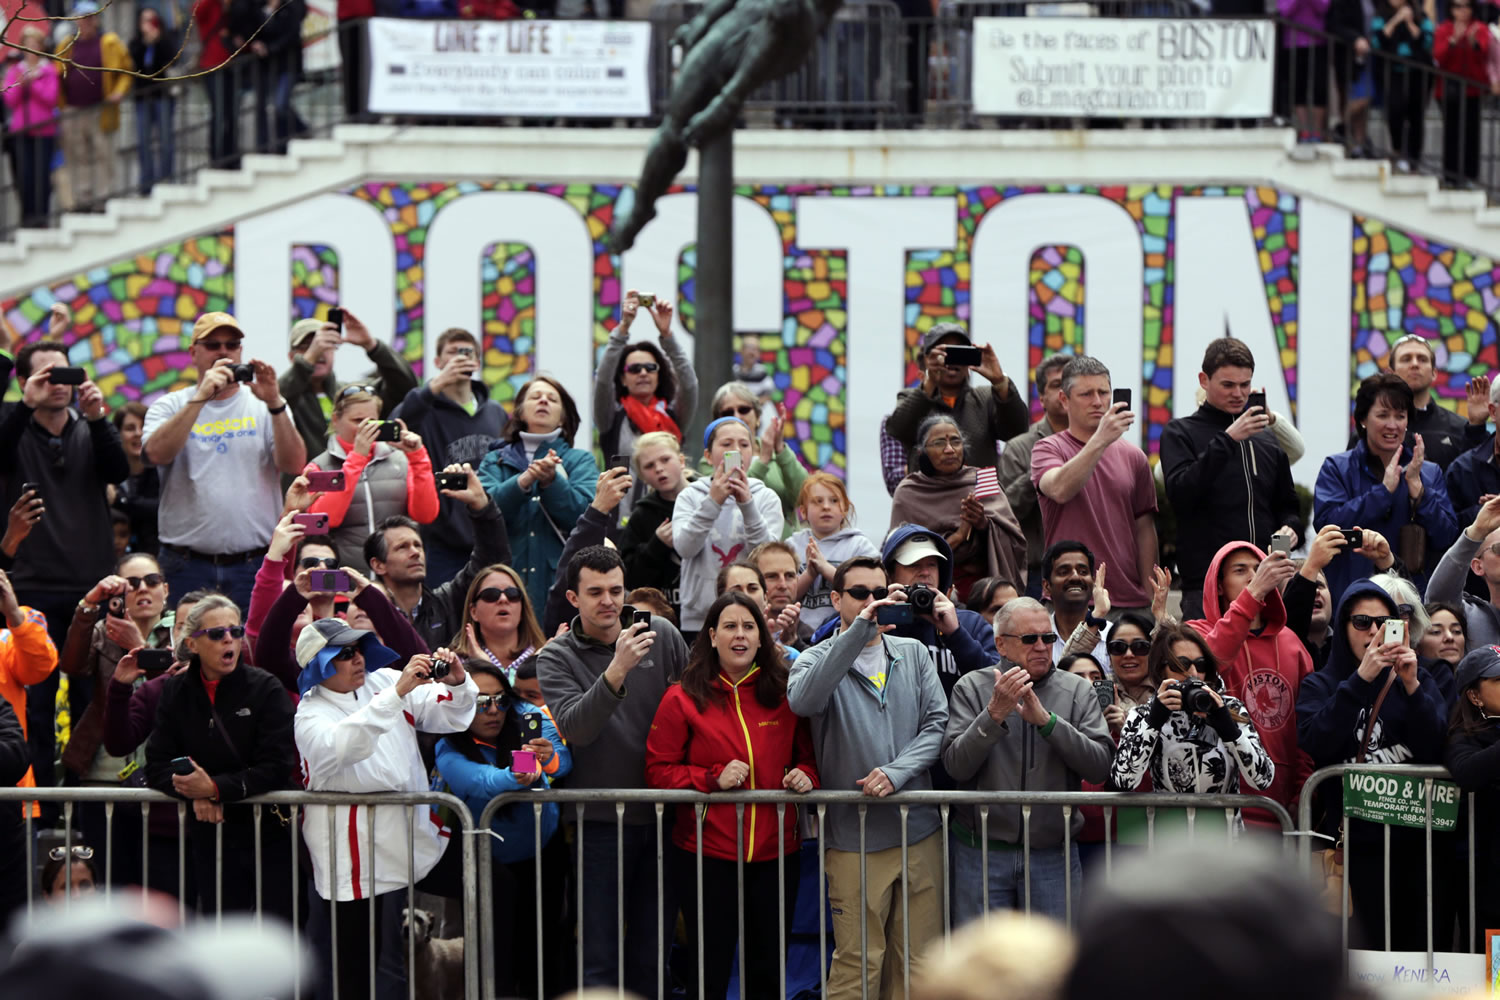 Race fans photograph and cheer for runners competing in the 118th Boston Marathon on Monday in Boston.